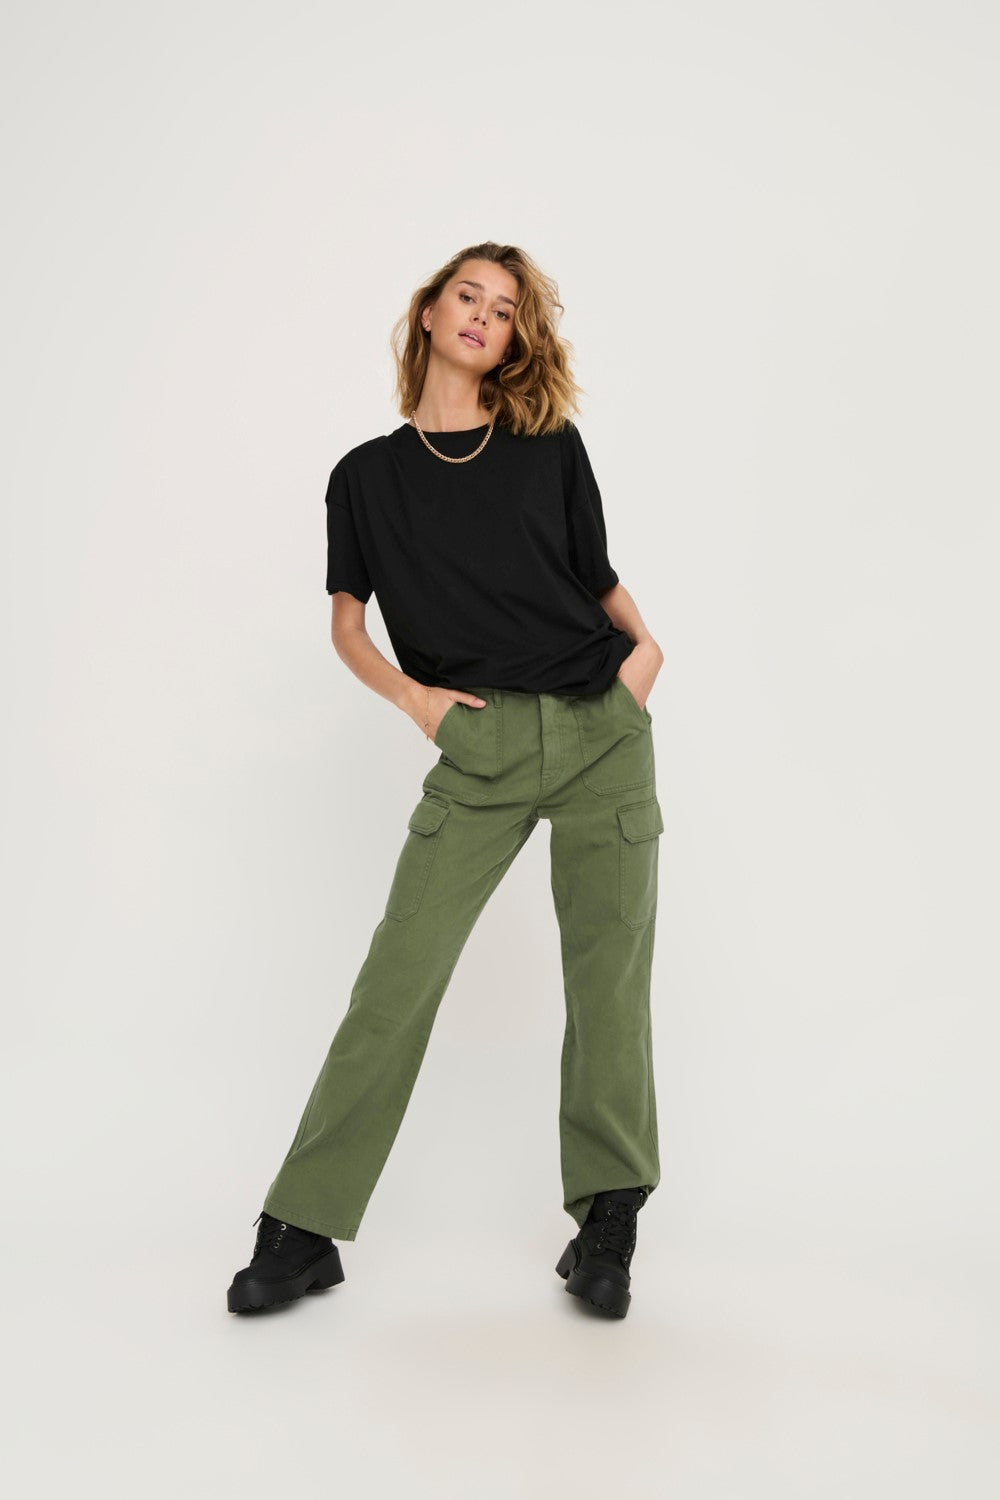 Malfy Cargo Pant- Only